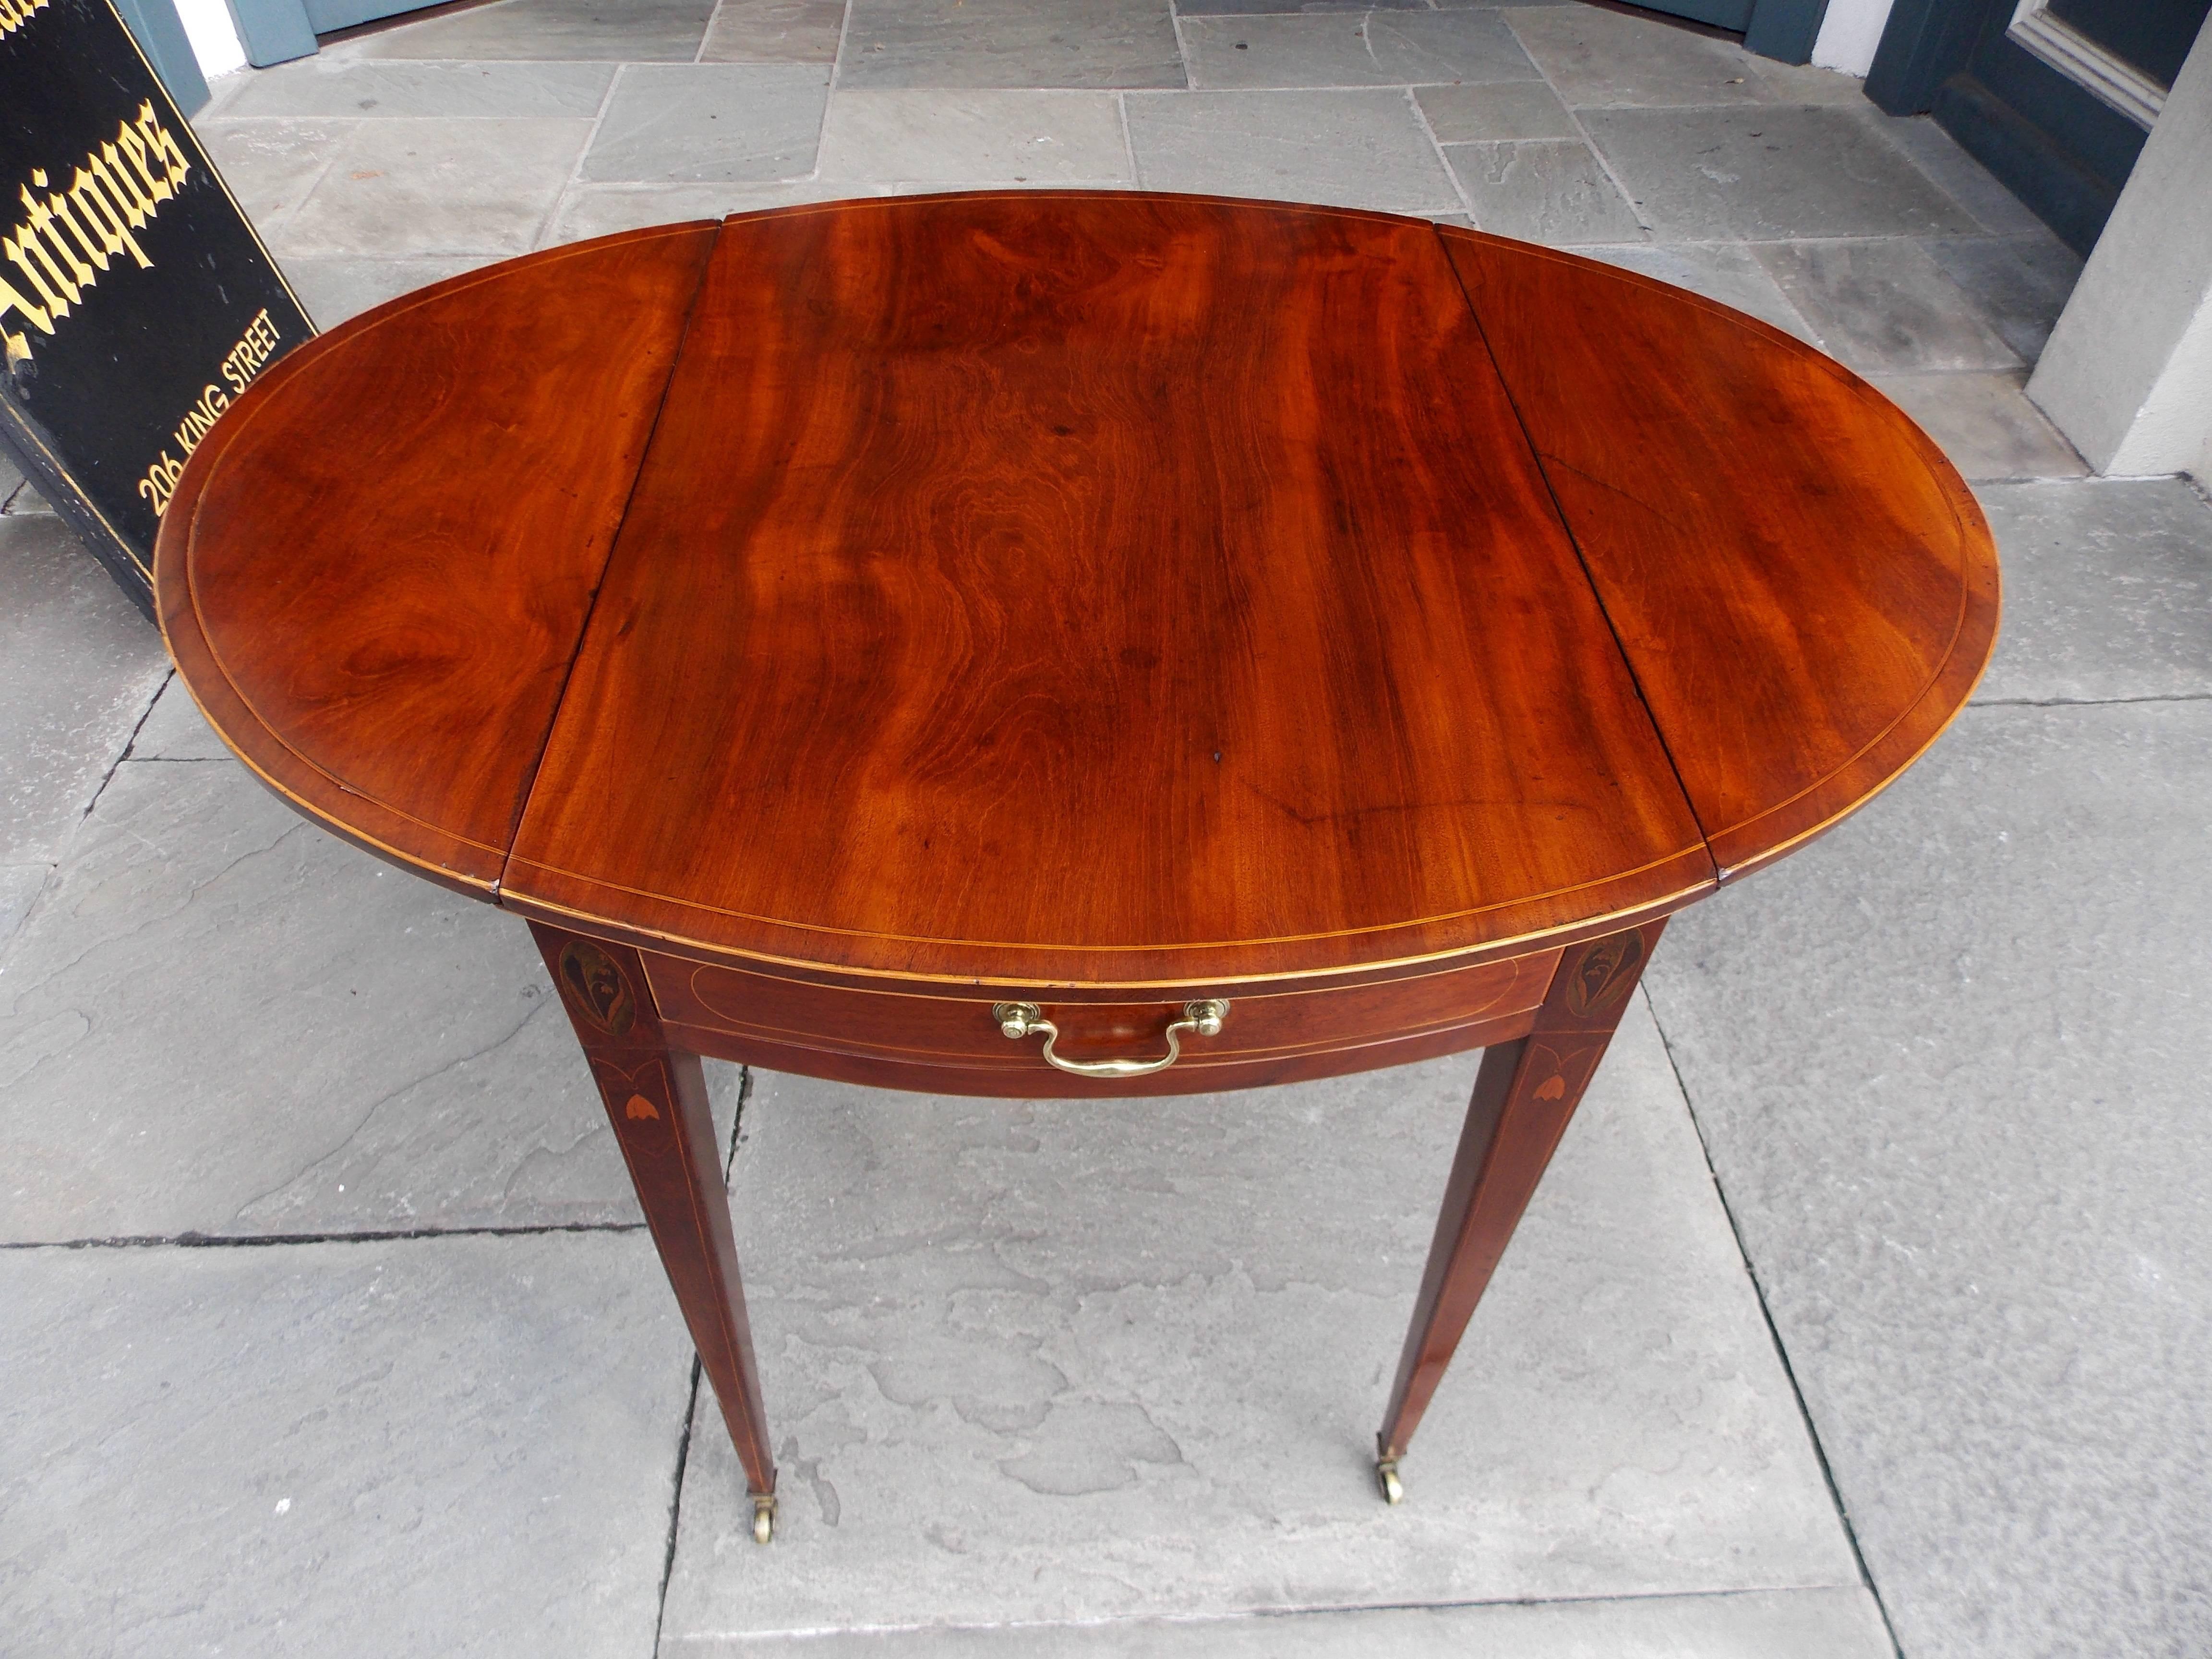 Charleston neoclassical mahogany one-drawer drop-leaf pembroke table with oval lilly of the valley inlay, bell flower and satinwood string inlay, and terminating on tapered legs with brass cup casters, Late 18th century. Table is 38.5